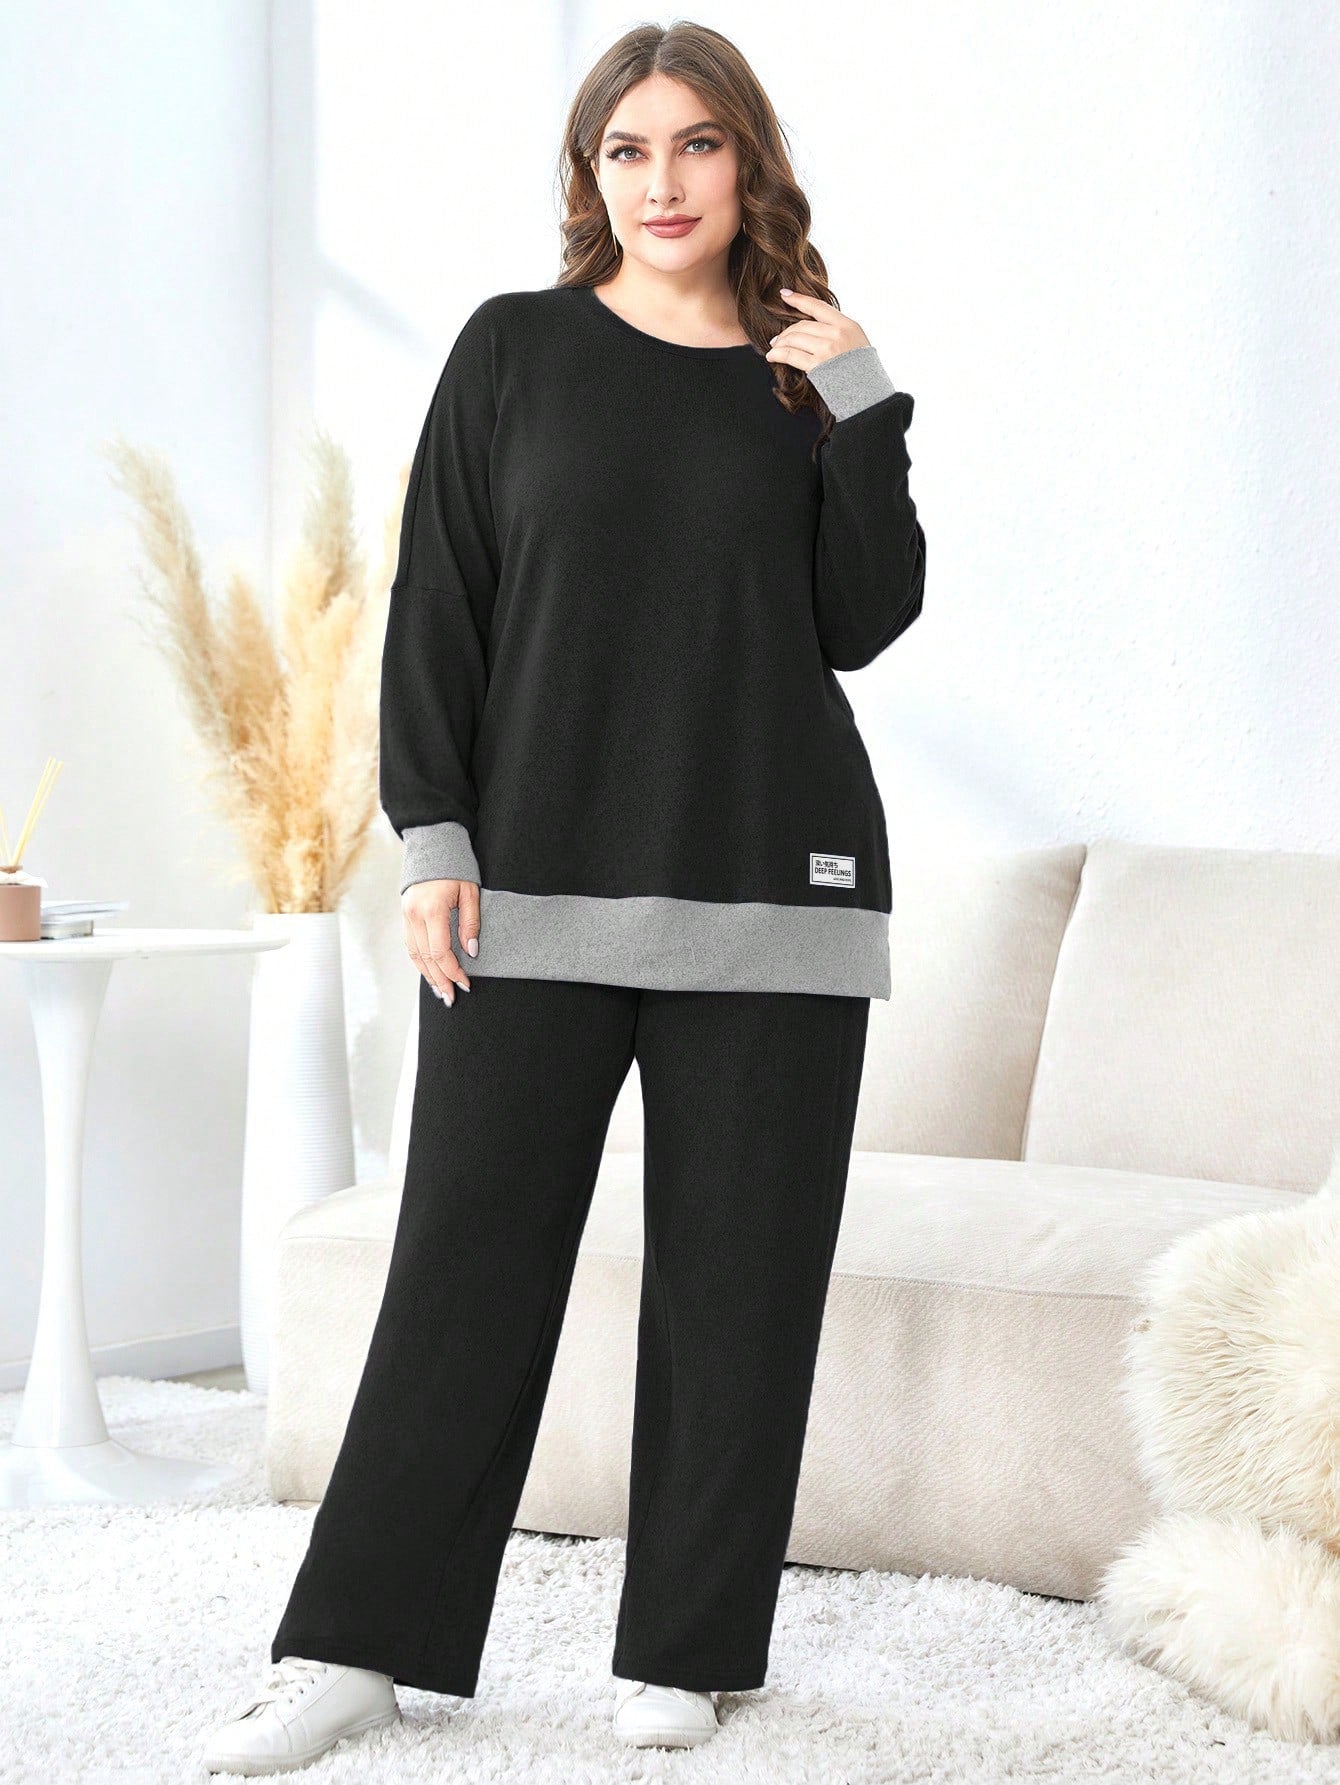 Plus Size Color-Blocked Long Sleeve Sweatshirt And Pants Two Piece Set